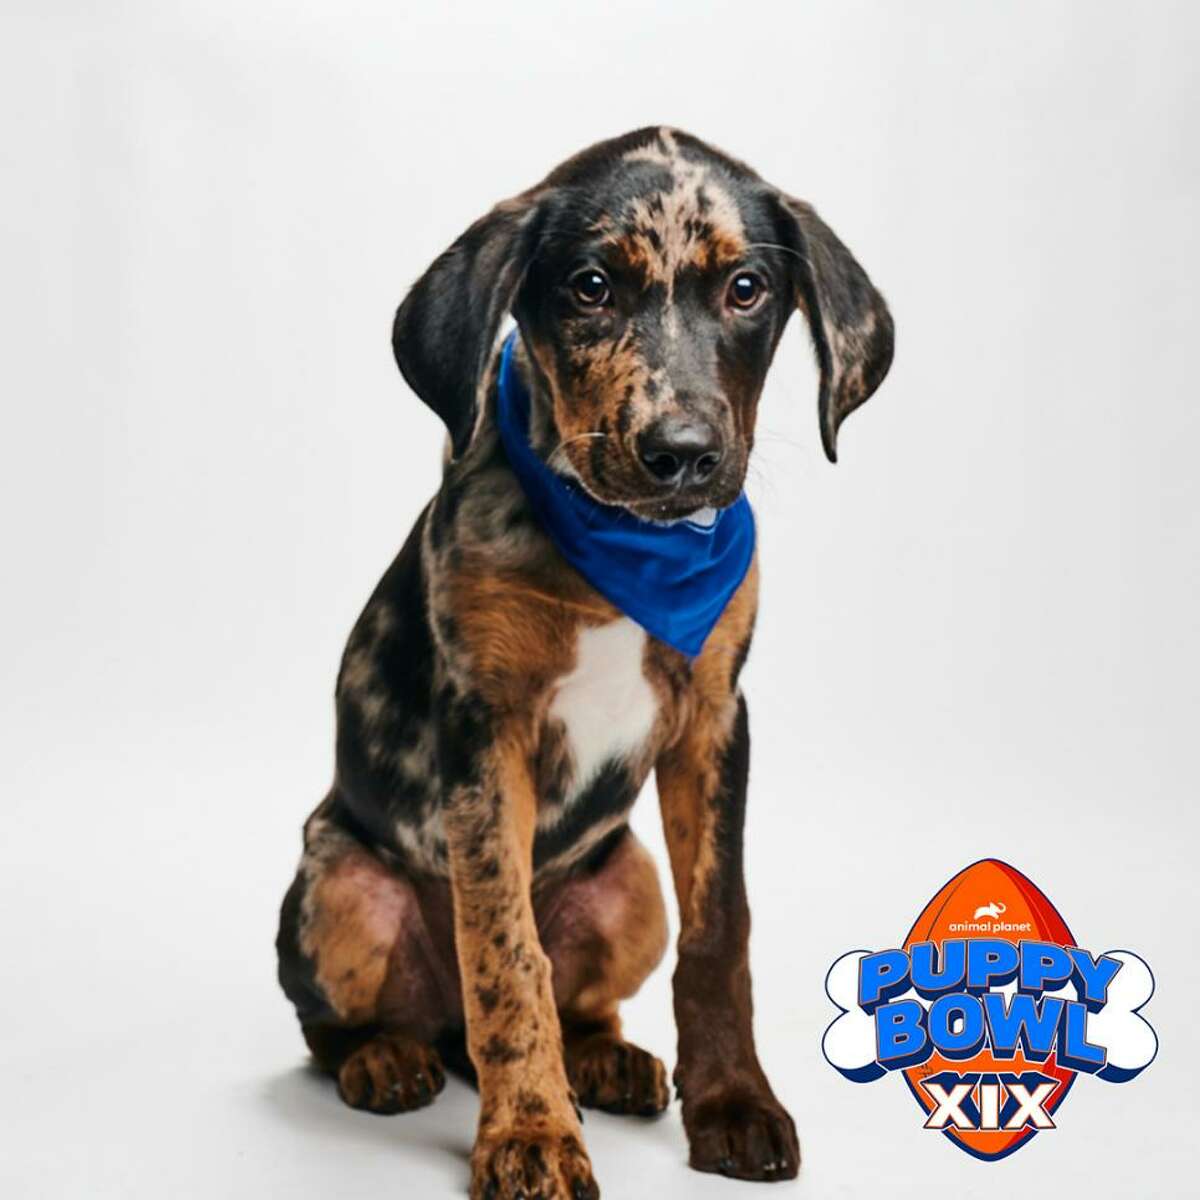 Madden from Dog Star Rescue will play in this year's Puppy Bowl on Sunday, Feb. 12.